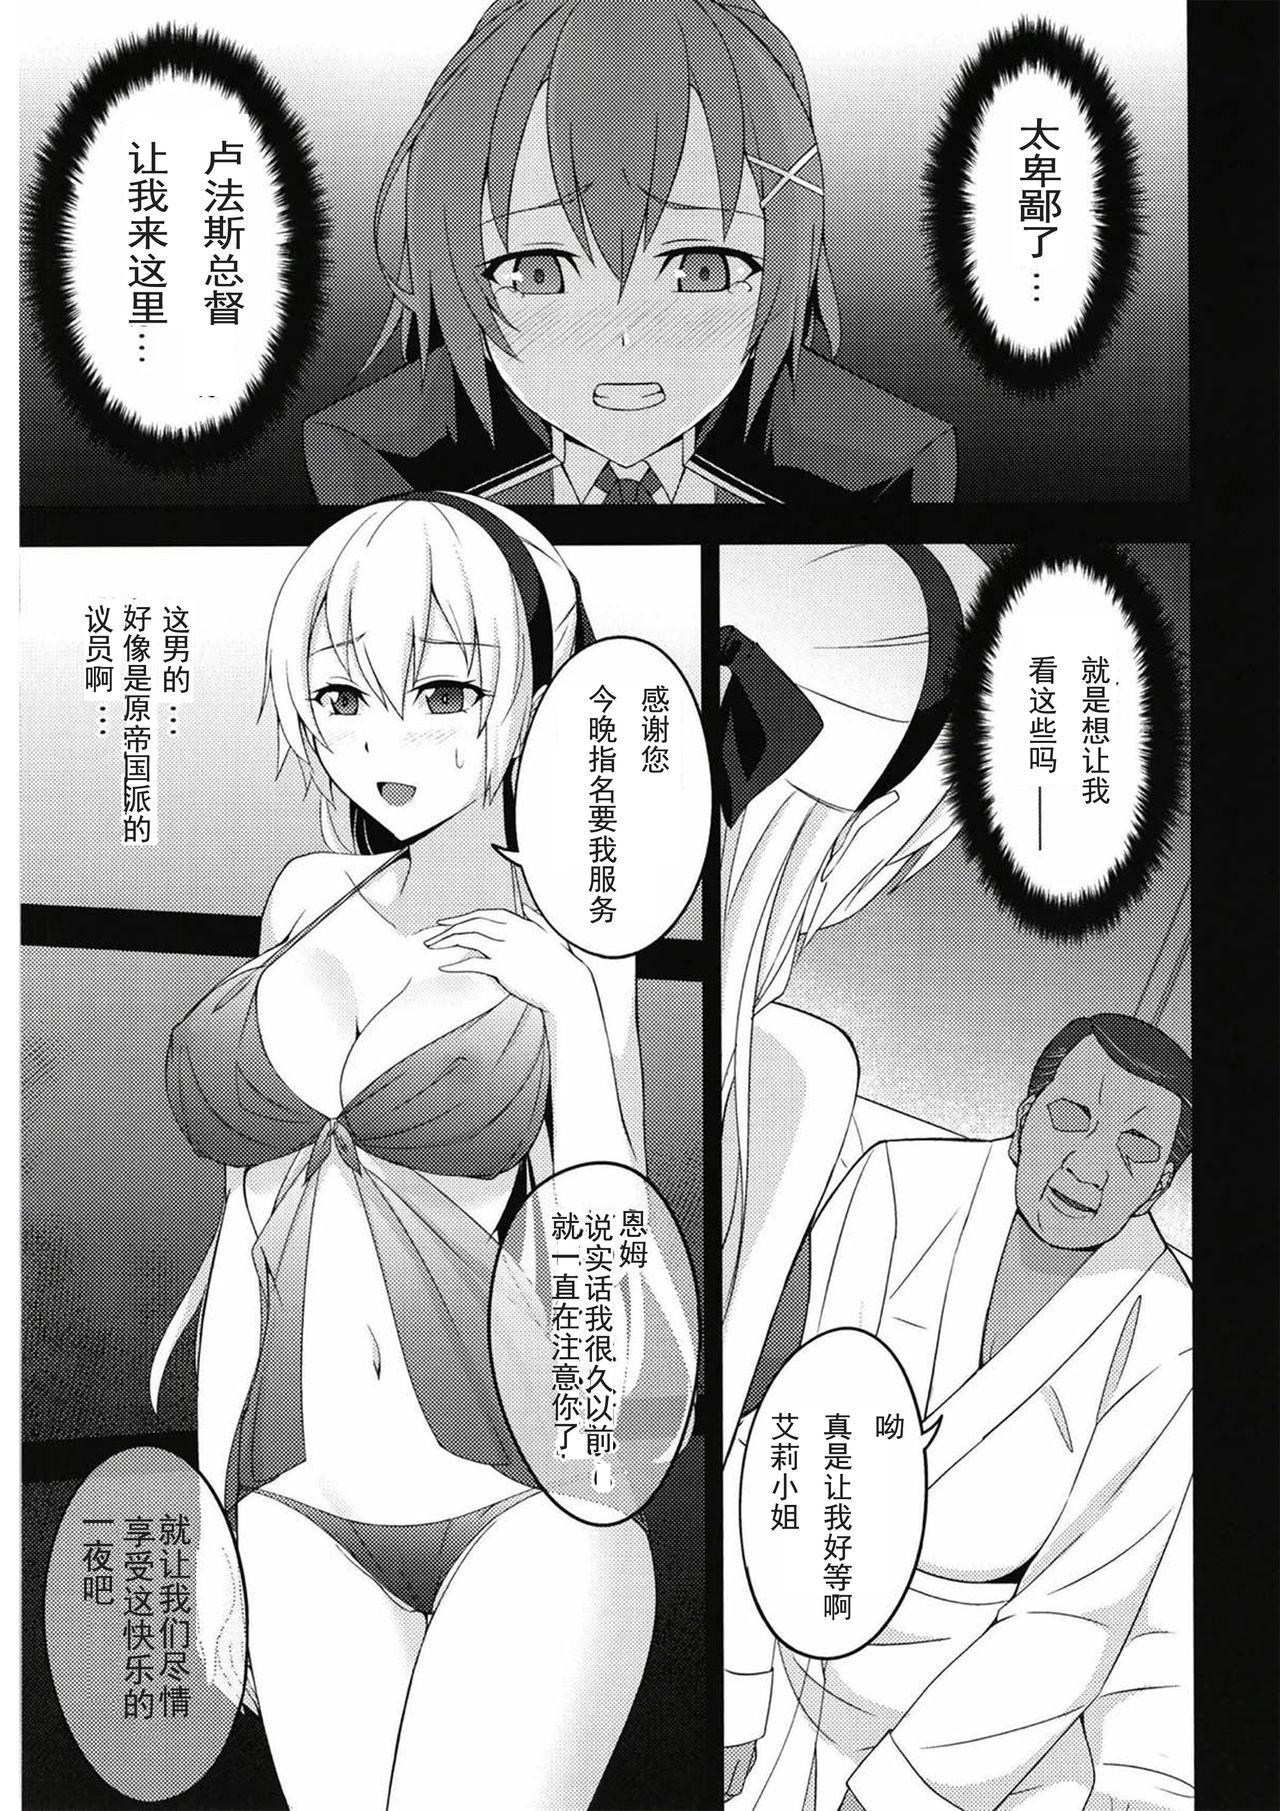 Anale Torikago no Yoru - The legend of heroes Mexicano - Page 10